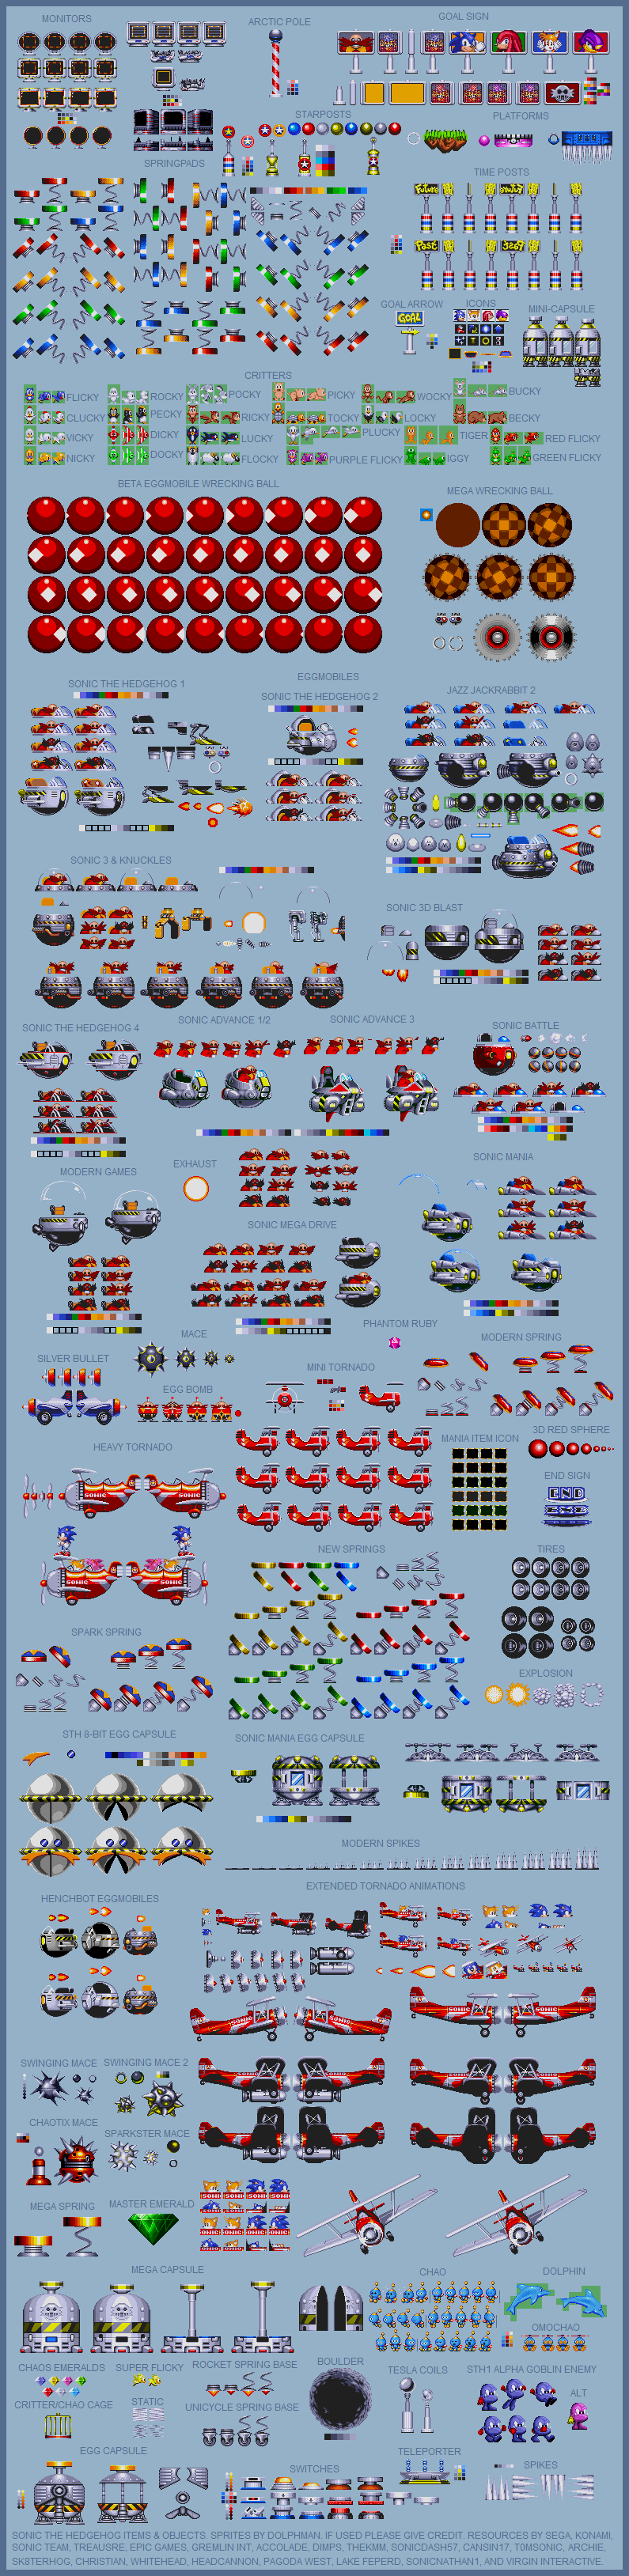 [Image: sth___items_and_objects___v2_by_retrobunyip-dbl4mqn.png]